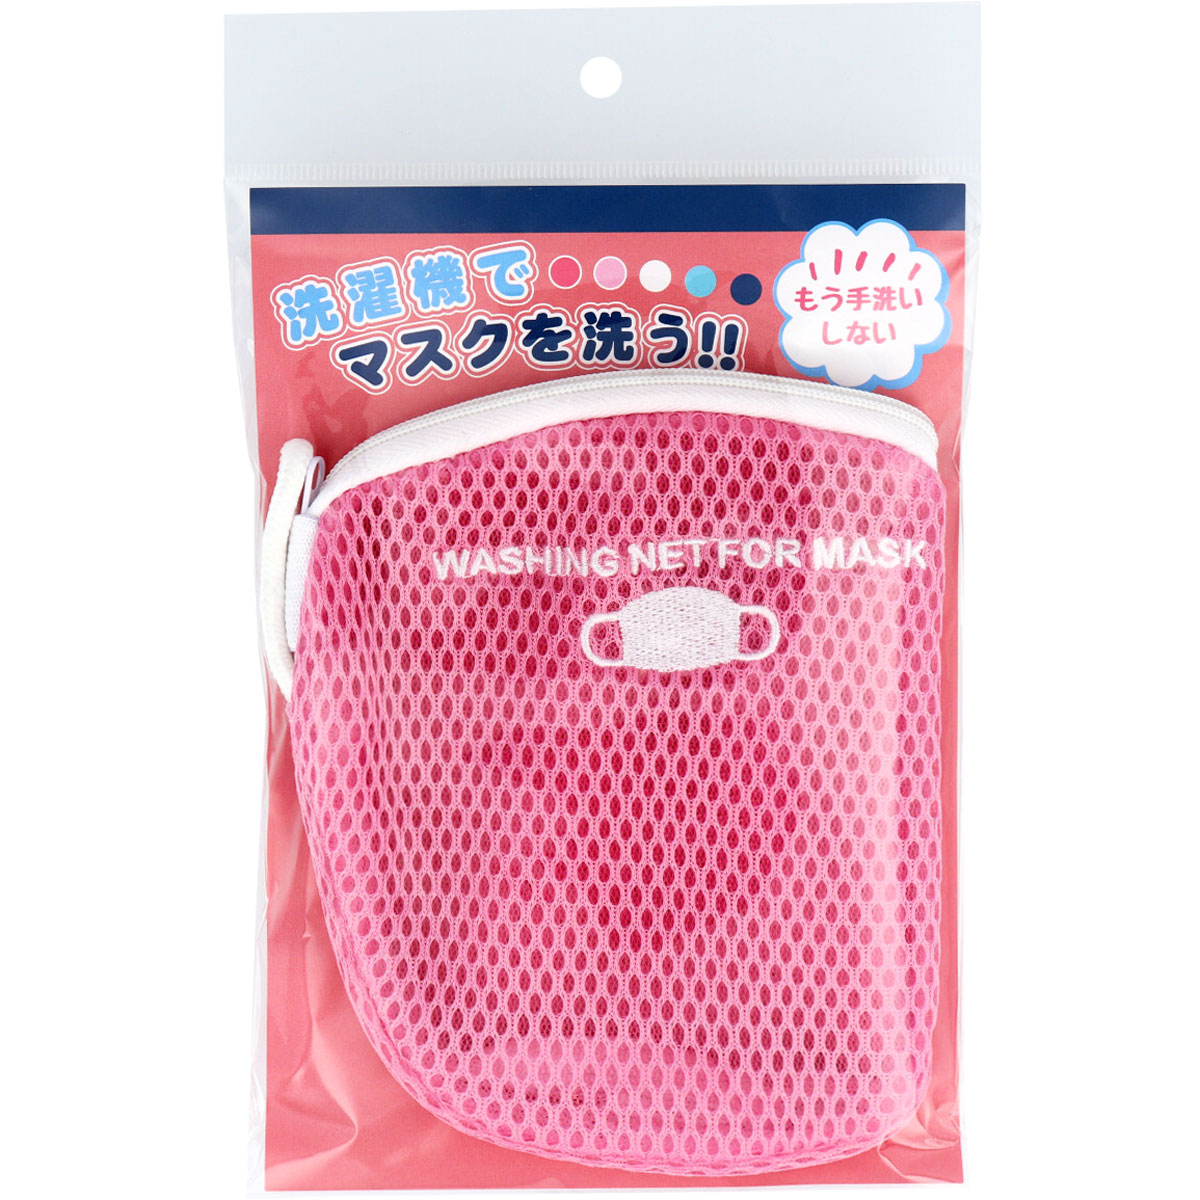 Picture of Pink color Washing bag for a face mask